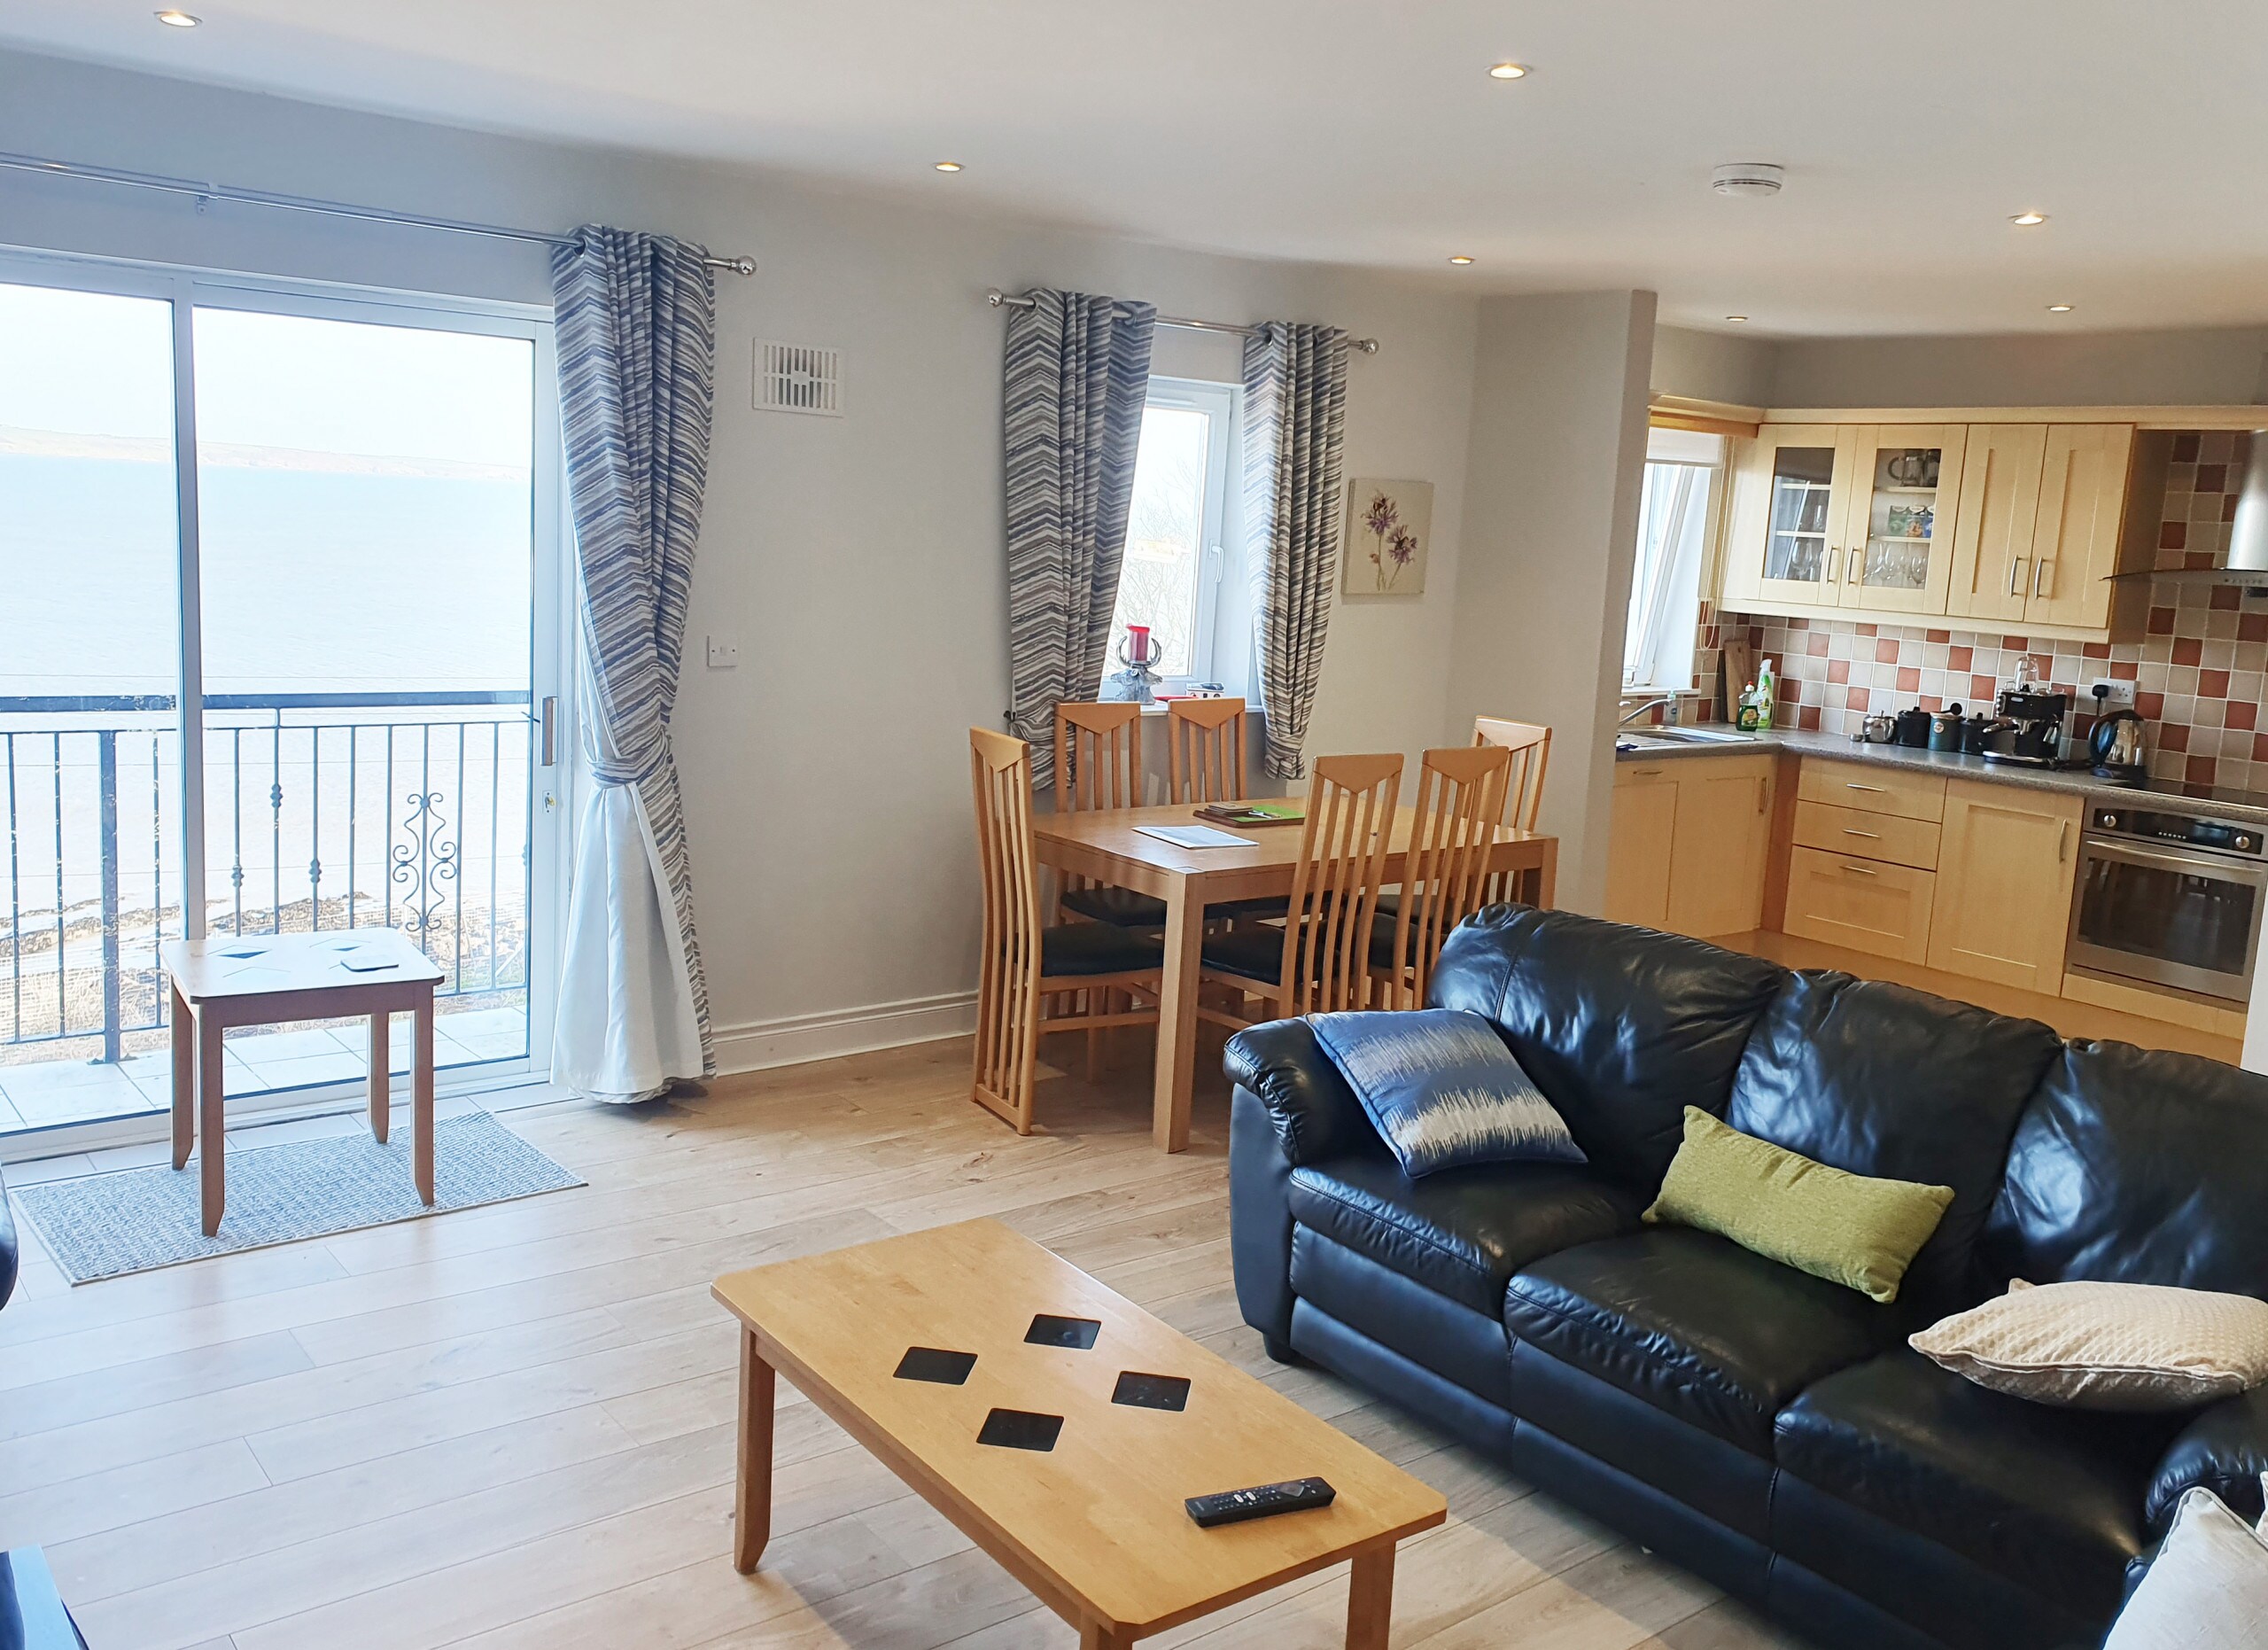 Ballycotton Holiday Apartment No 6, Seaside Holiday Accommodation Available in Ballycotton, County Cork